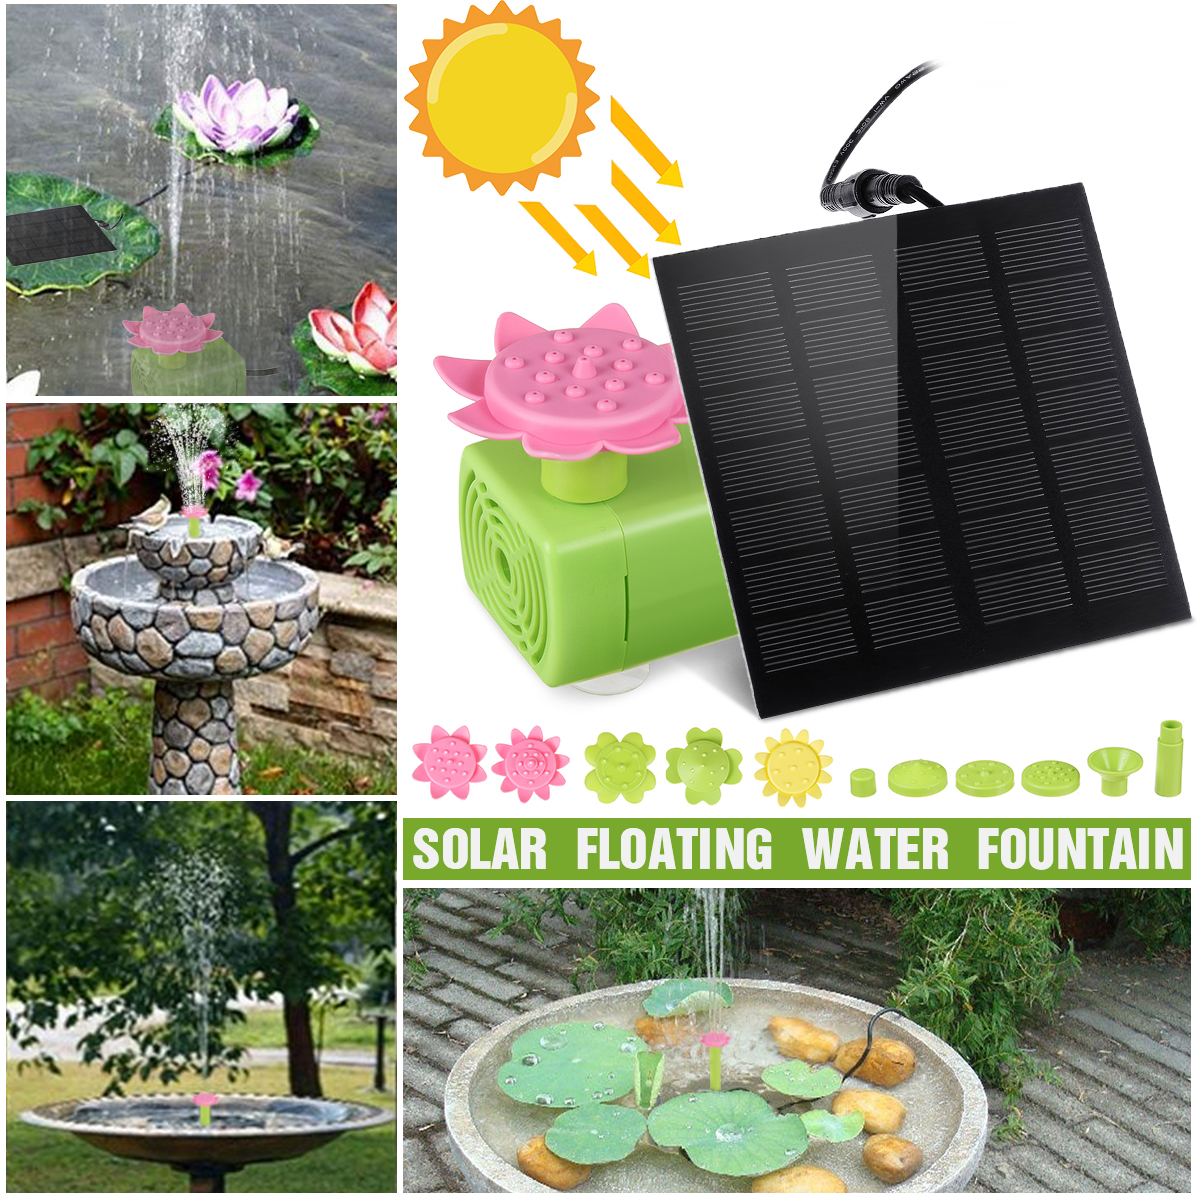 7V-14W-Solar-Powered-Water-Fountain-Pumps-Floating-Fountains-Pump-Waterproof-Home-Pond-Garden-Decor-1839781-2